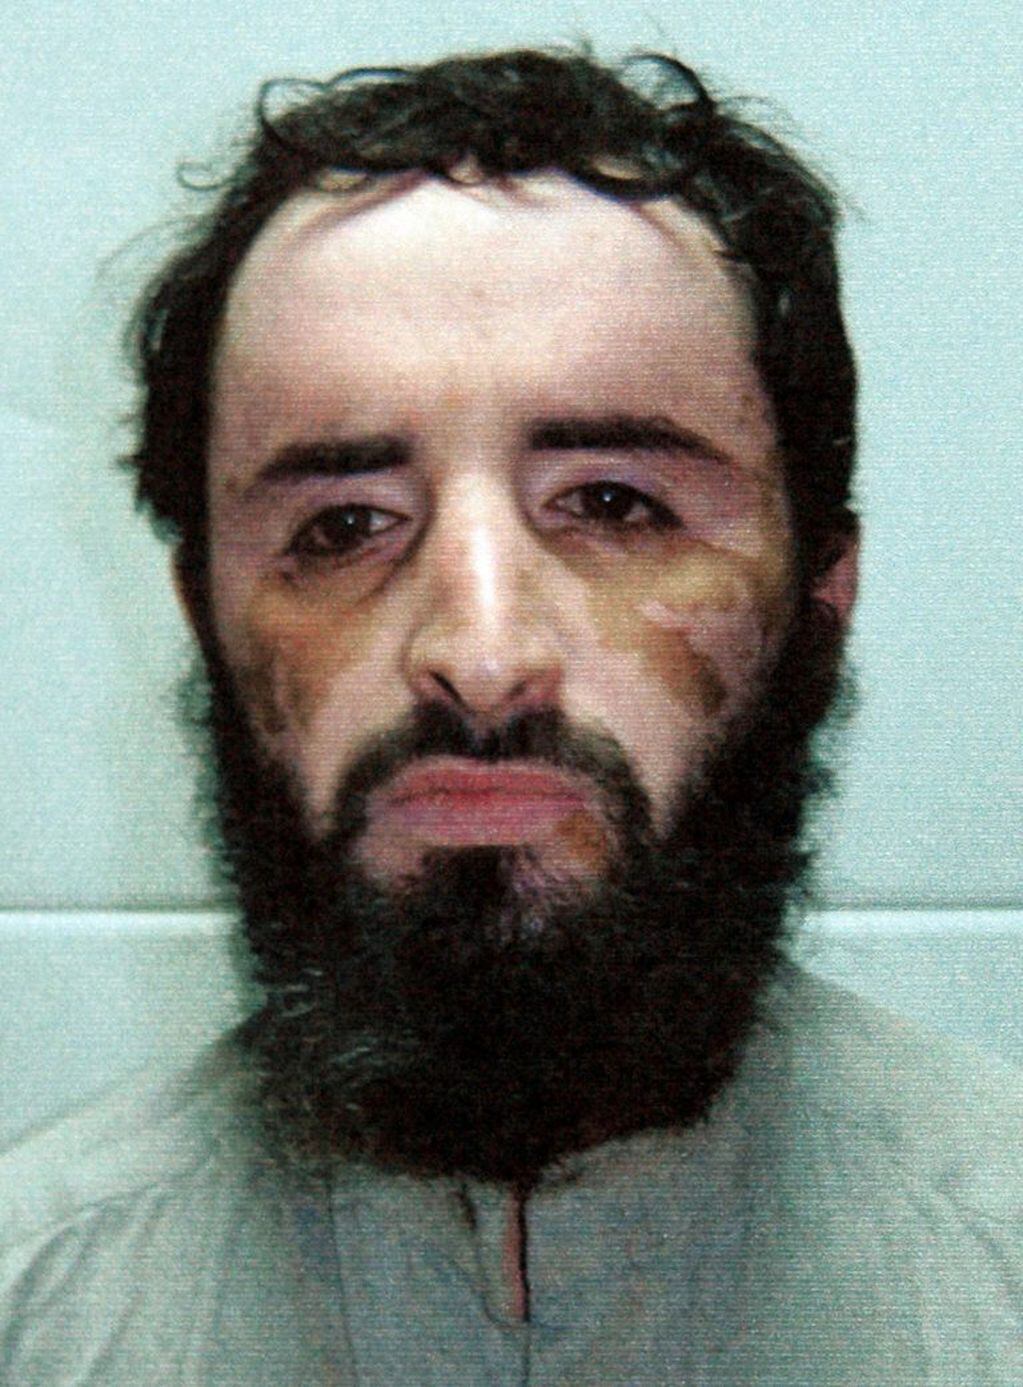 FILE - This file photo released by Pakistan's Interior Ministry shows senior al-Qaida leader Abu Faraj al-Libi on May 4, 2005, in Islamabad, Pakistan.  To his CIA interrogators in a secret prison in Iraq Al-Libi, a Libyan who had become al-Qaida's operational commander after Khalid Sheikh Mohammed's capture, adamantly denied knowing one of al-Qaida's most important couriers, Abu Ahmed al-Kuwaiti. Suspecting a lie, and an important one, the CIA reasoned that if they could find al-Kuwaiti, they could find bin Laden. And years later al-Kuwaiti did unwittingly lead the agency to Osama bin Laden's doorstep in Pakistan. (AP Photo/Pakistan Interior Ministry, HO, File) pakistan islamabad Abu Faraj al Libi lider red terrorista al qaeda terrorismo terroristas